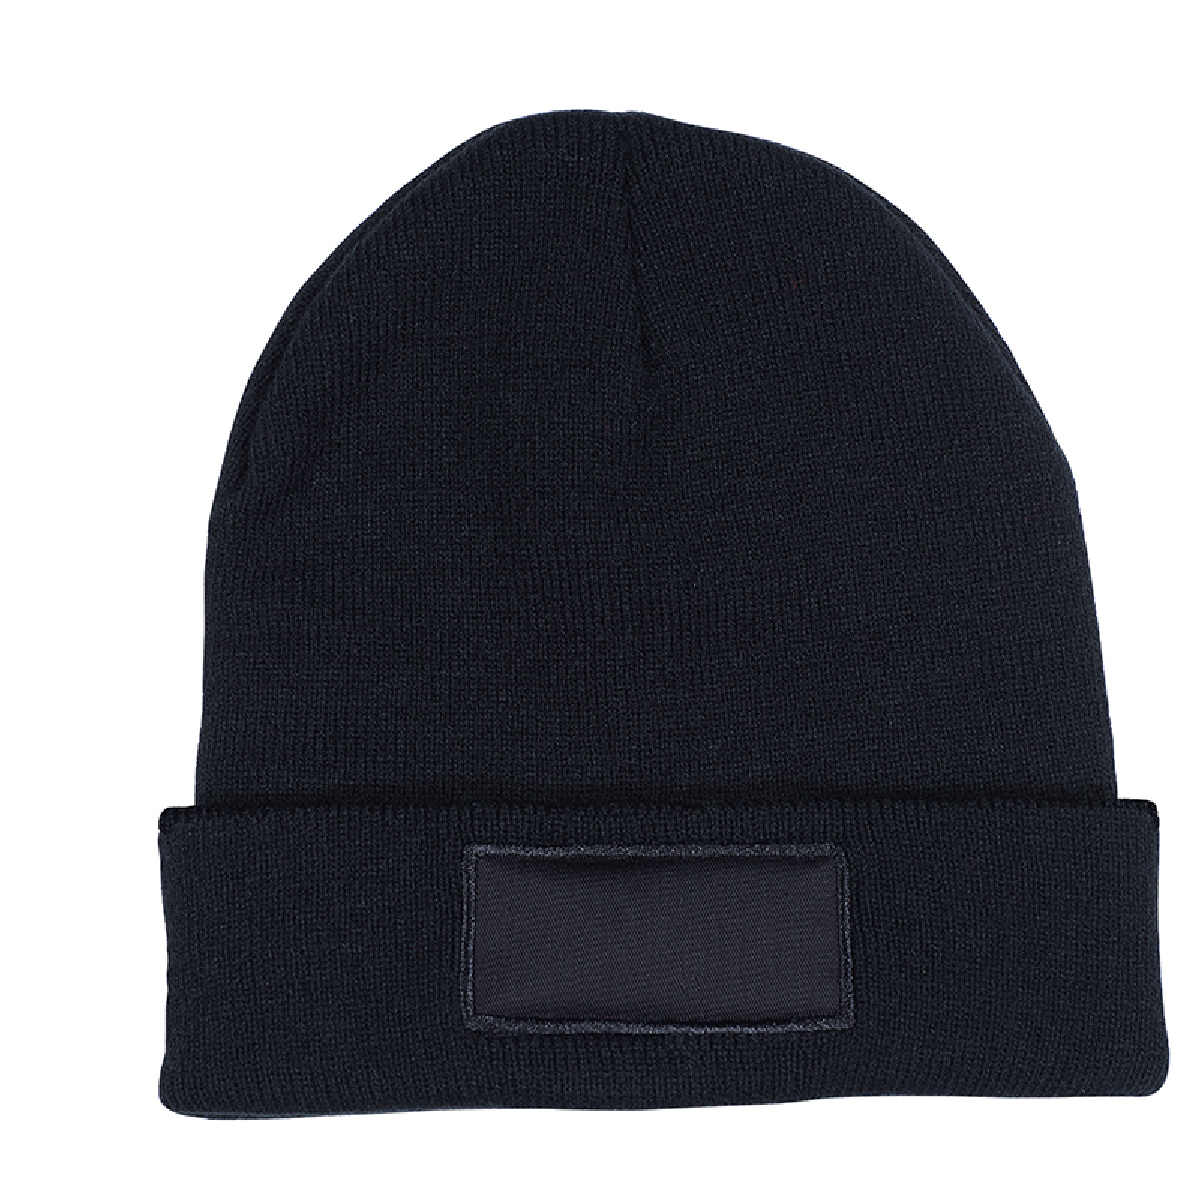 Black Knit Beanie with Patch